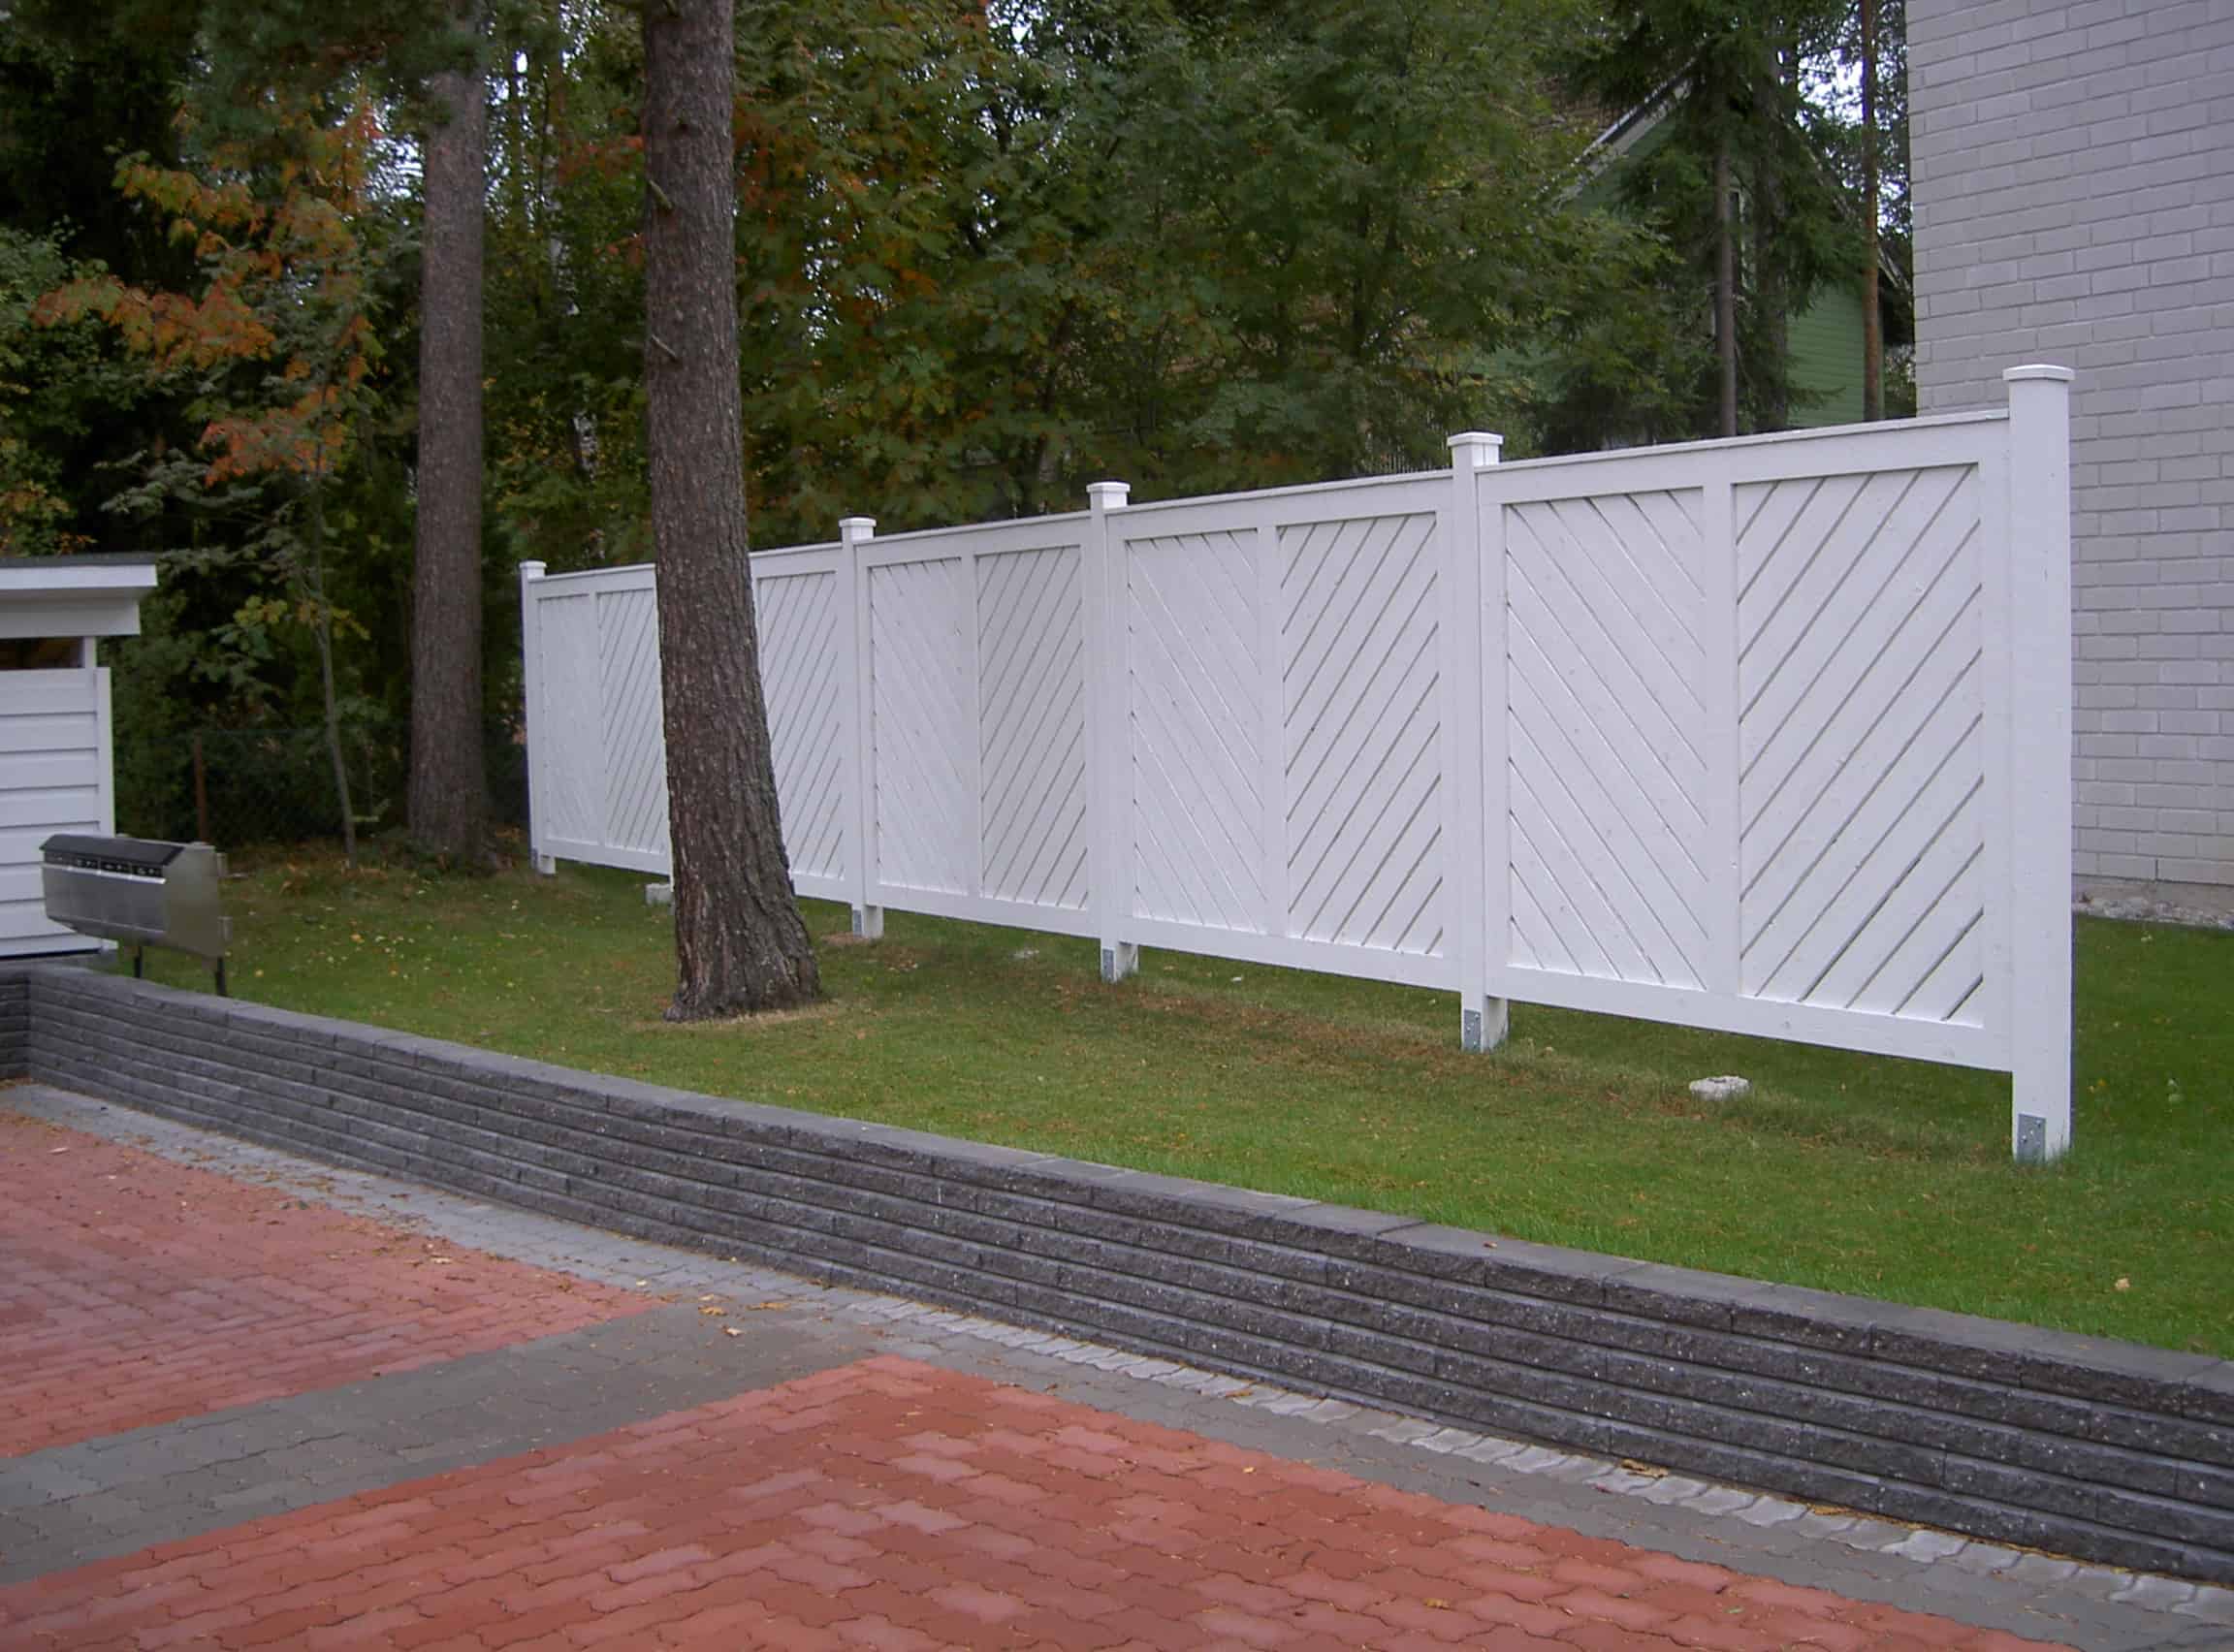 Painted fence board, shade: white